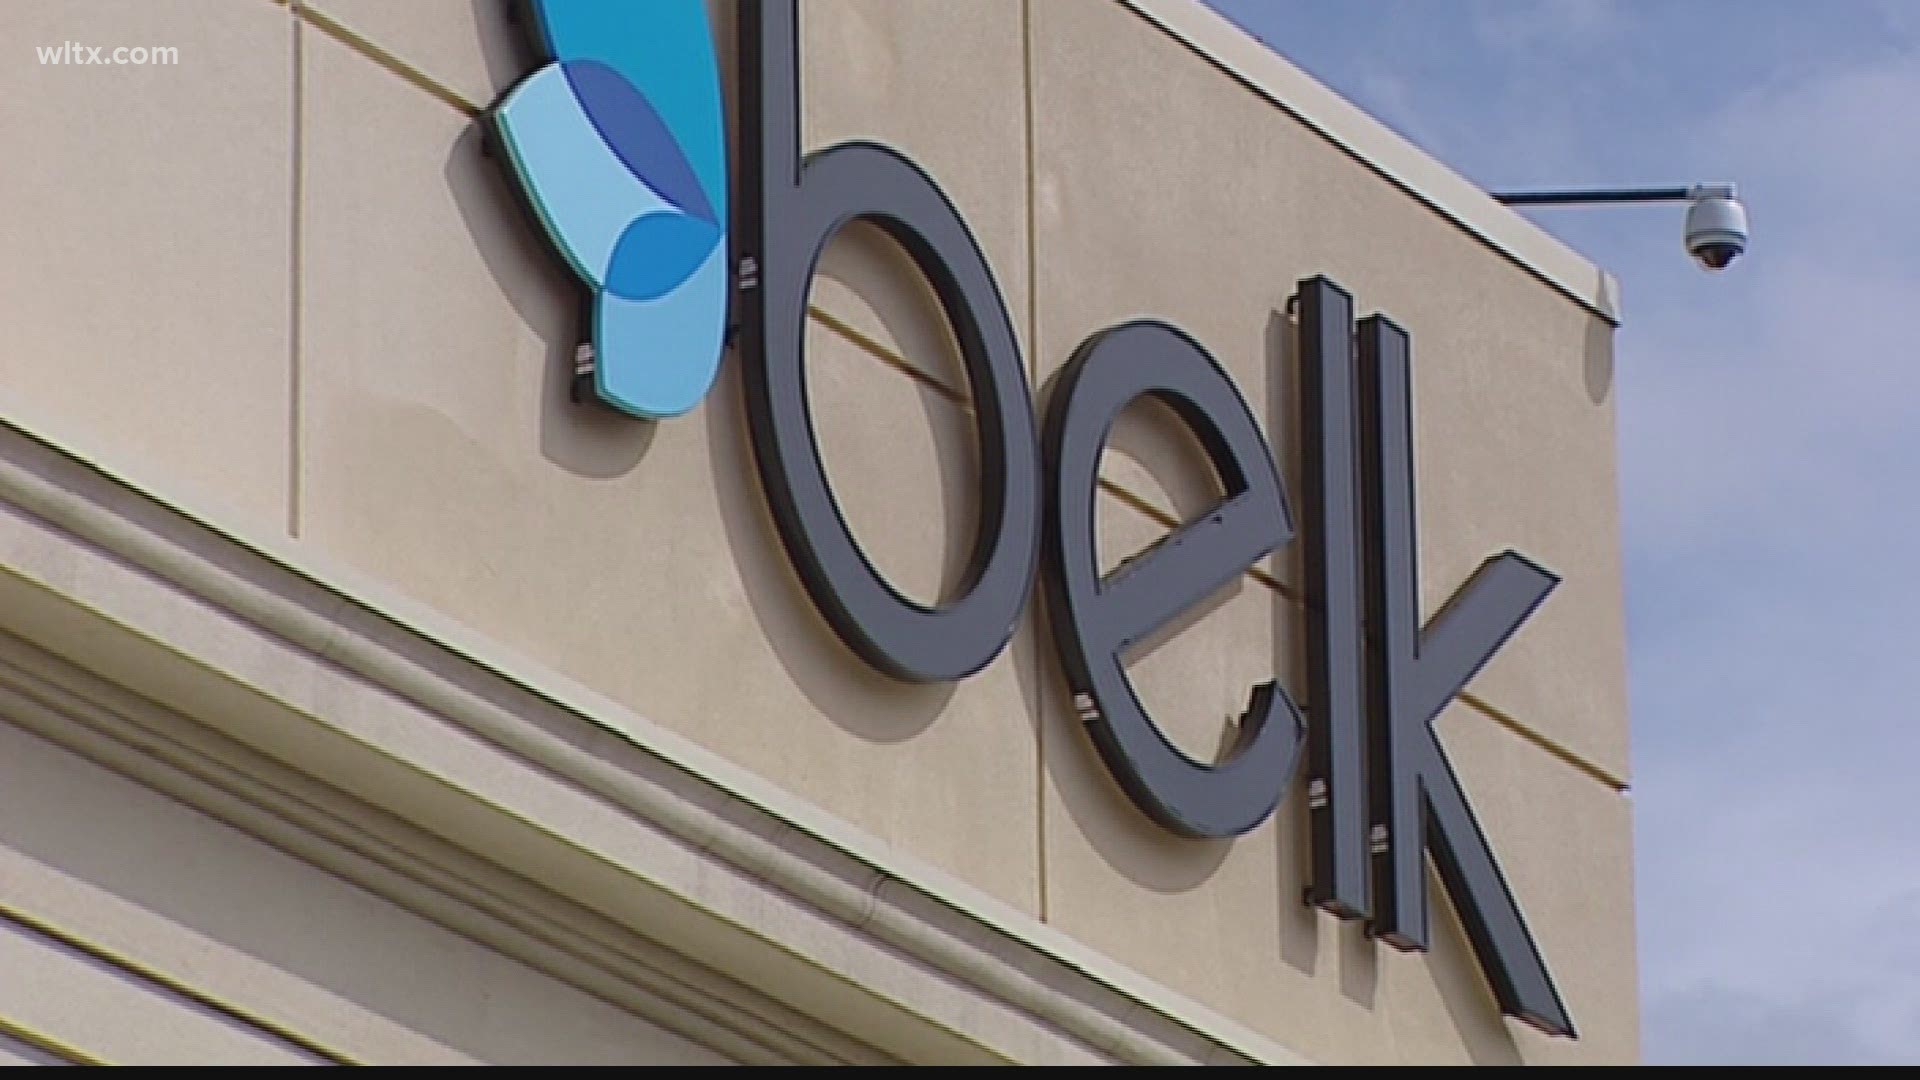 Belk location at Richland Mall to close in September as mall renovations begin